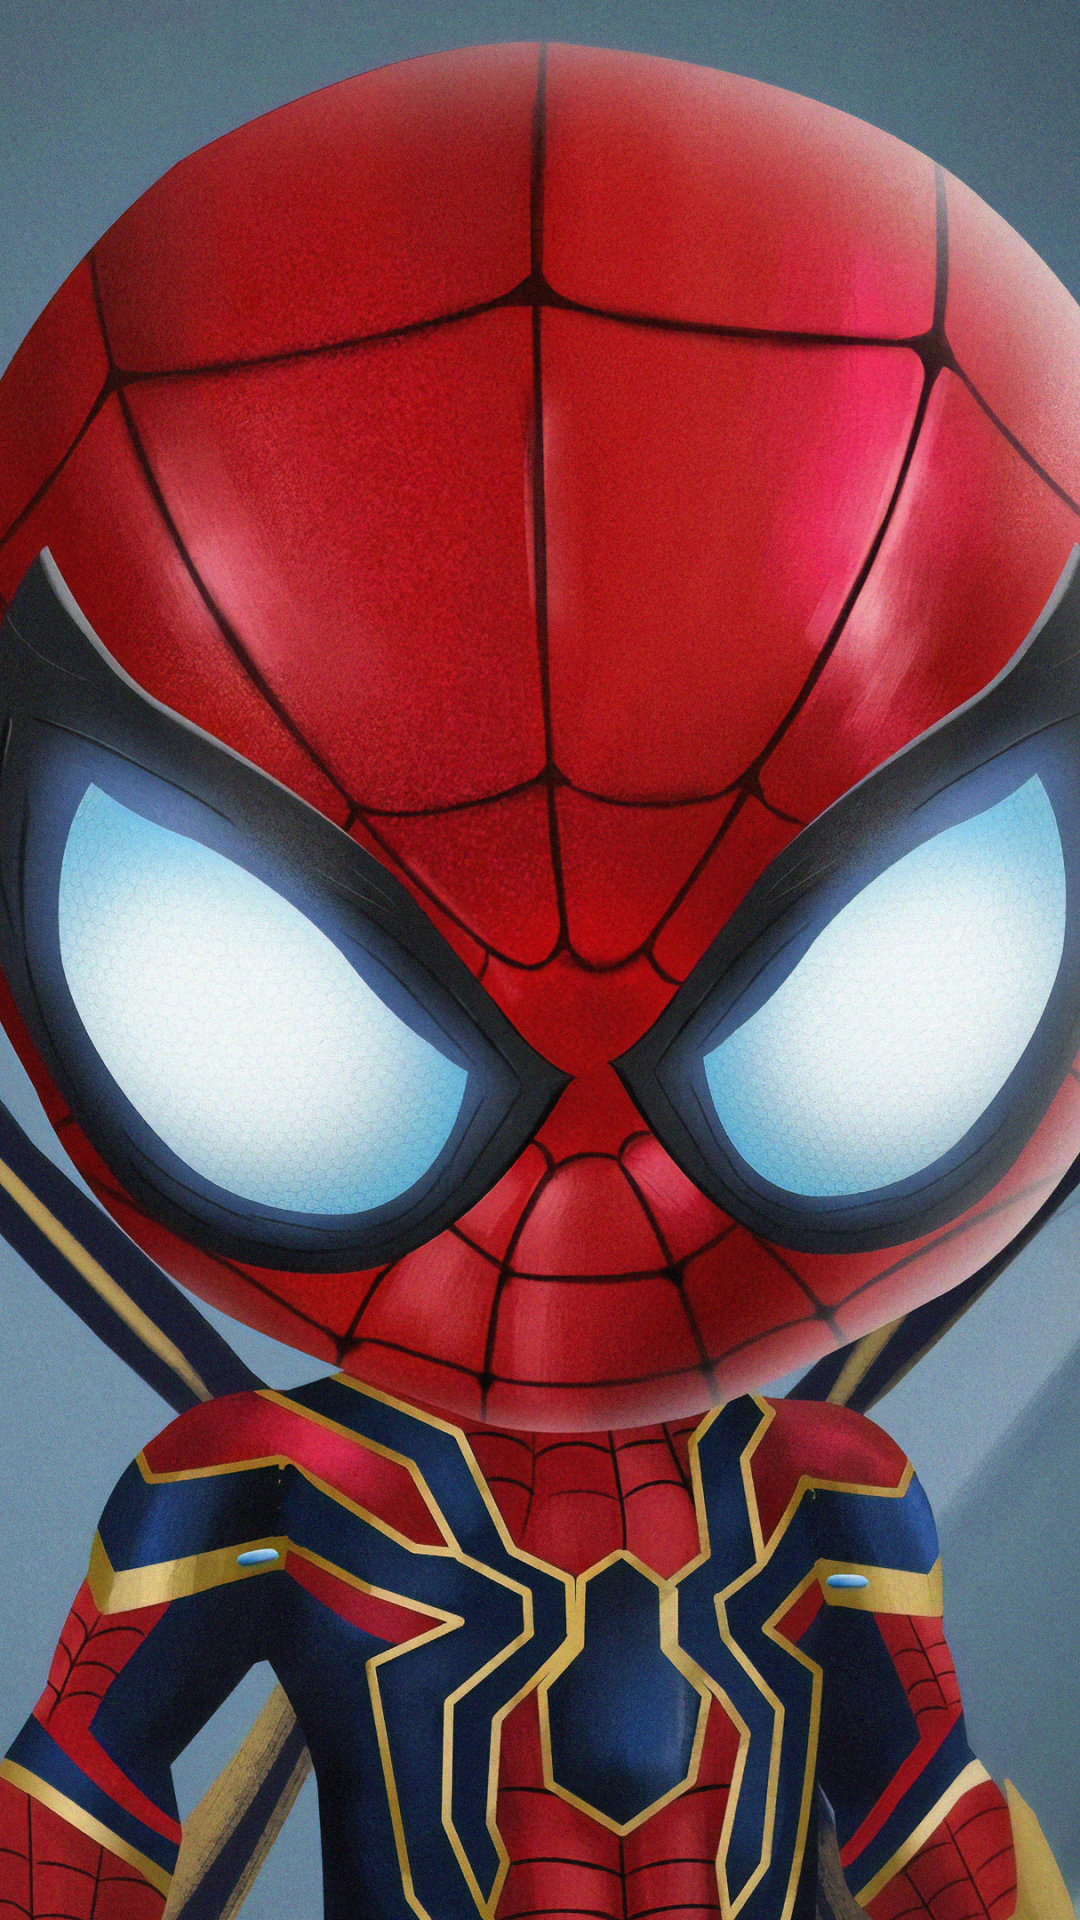 Chibi Spiderman - Finished Projects - Blender Artists Community